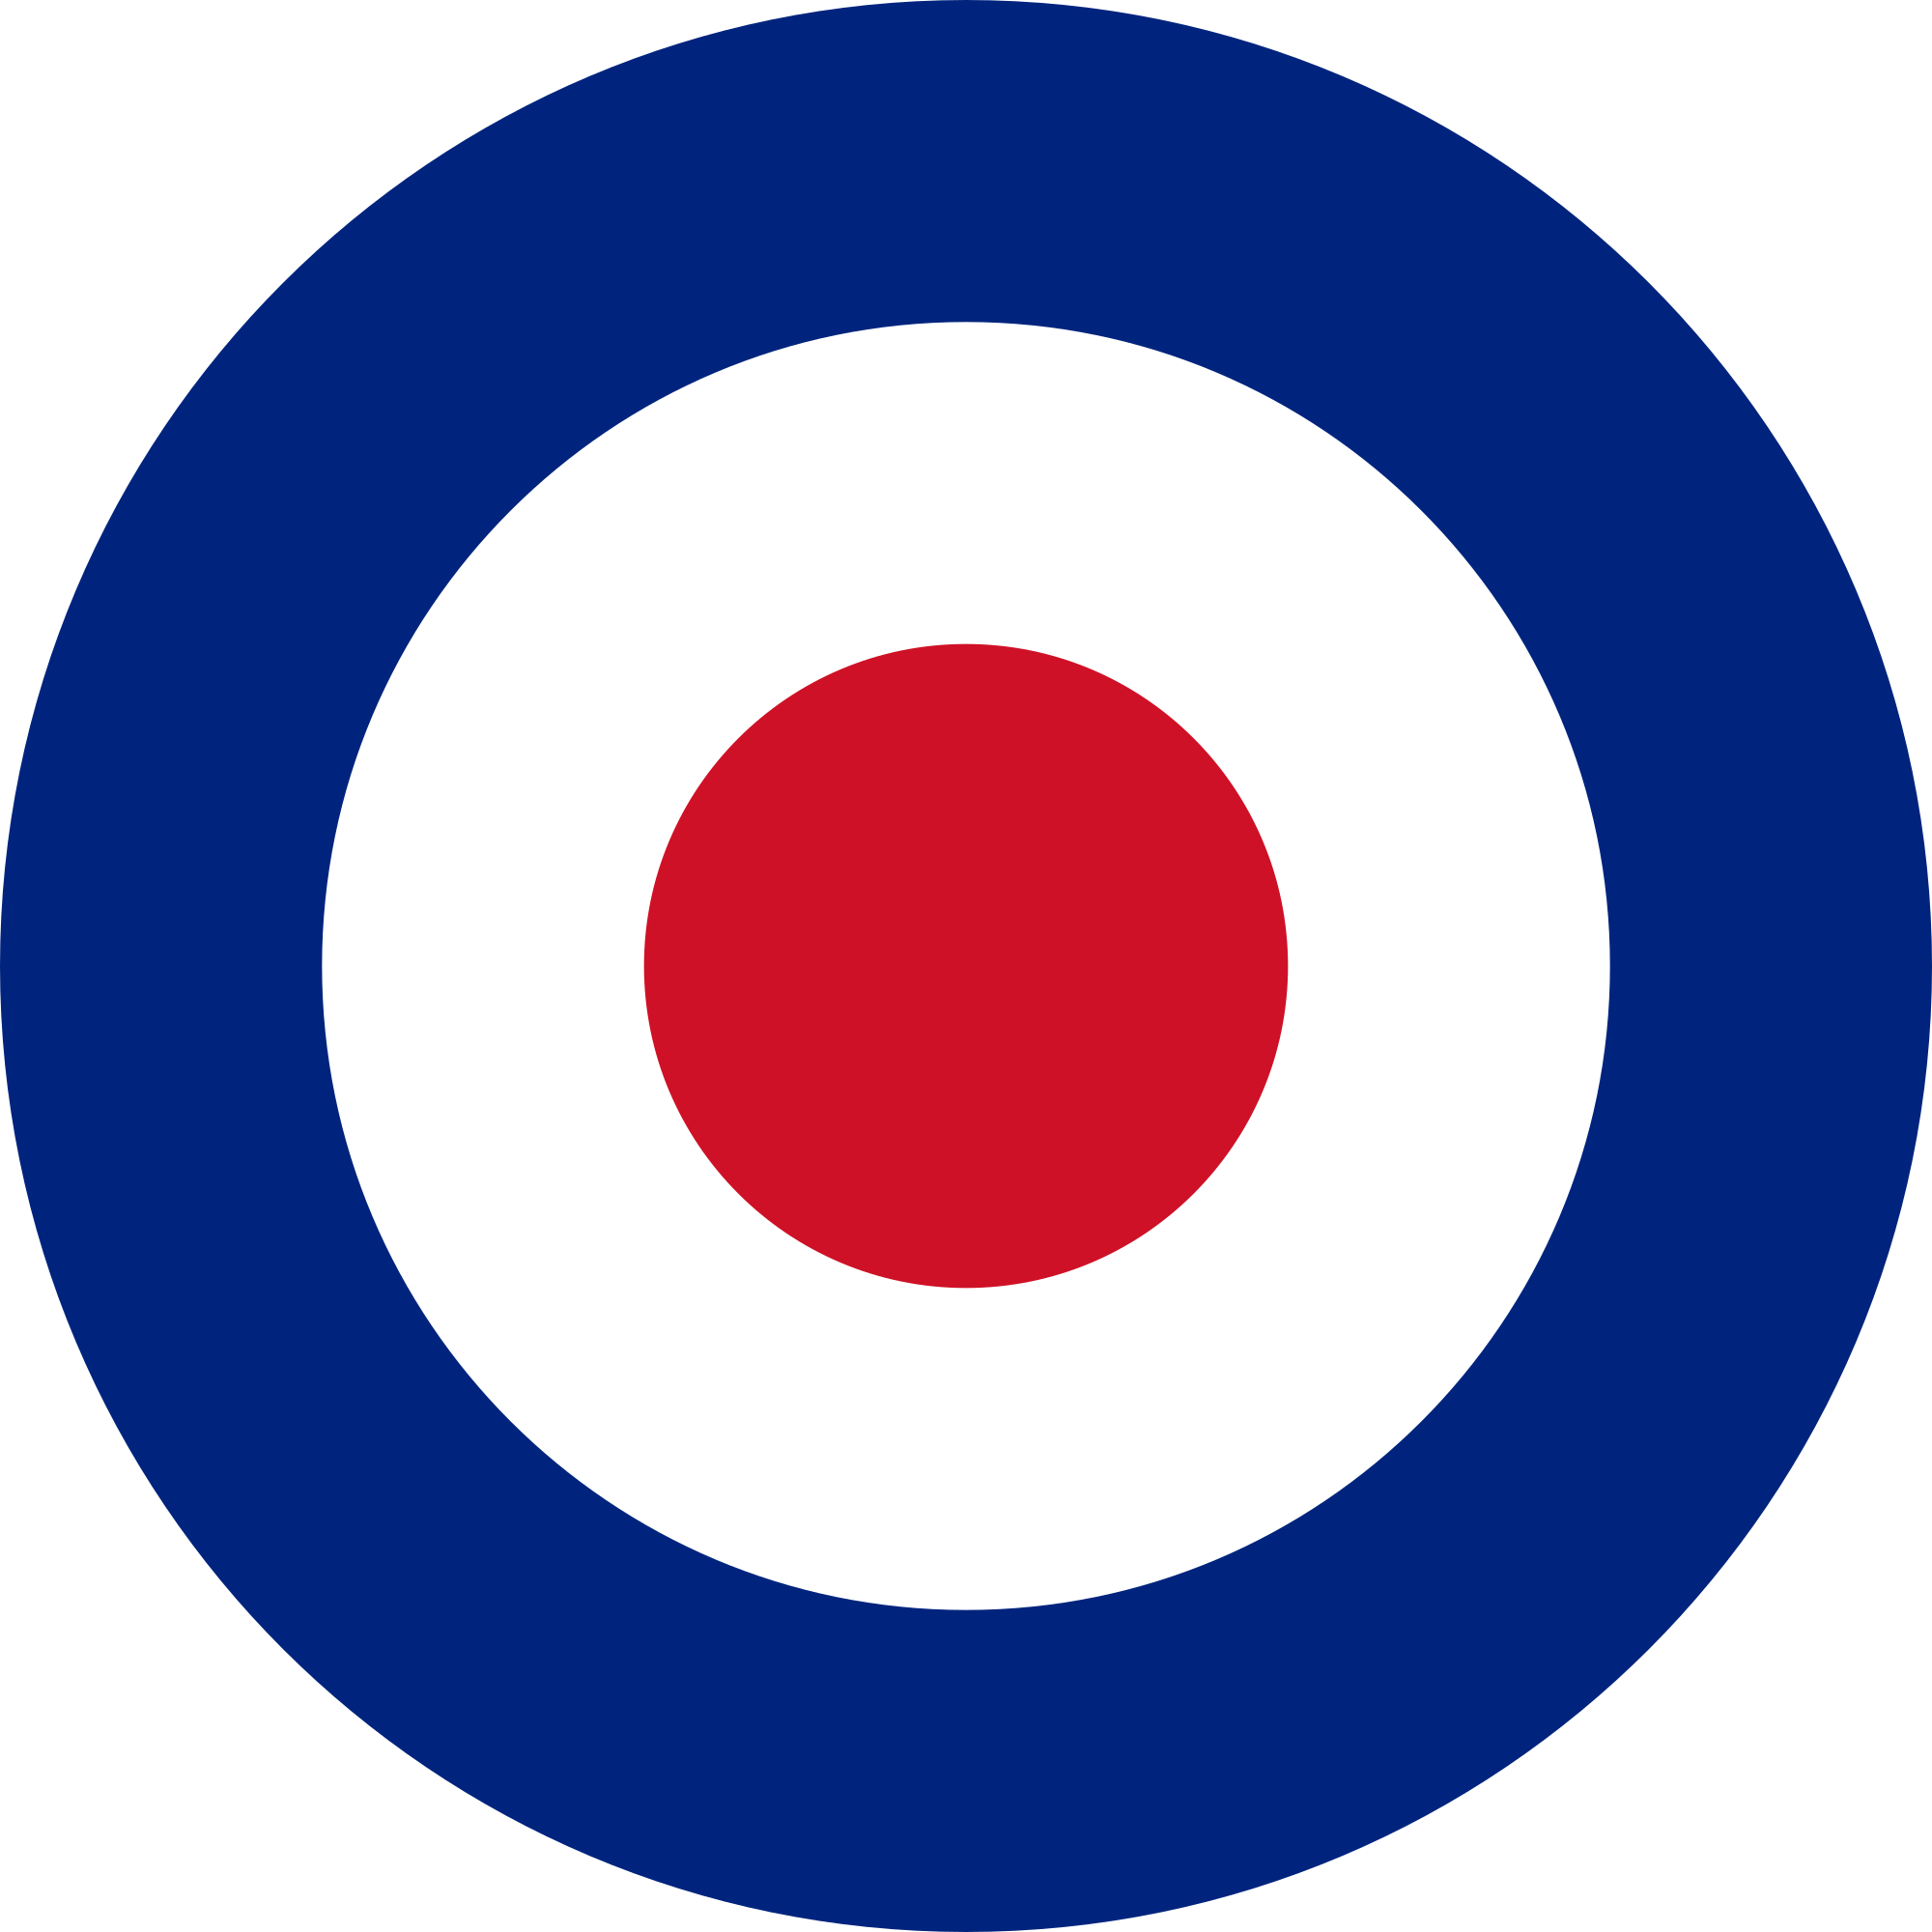 Indian Air Force Roundel (2000x2000)